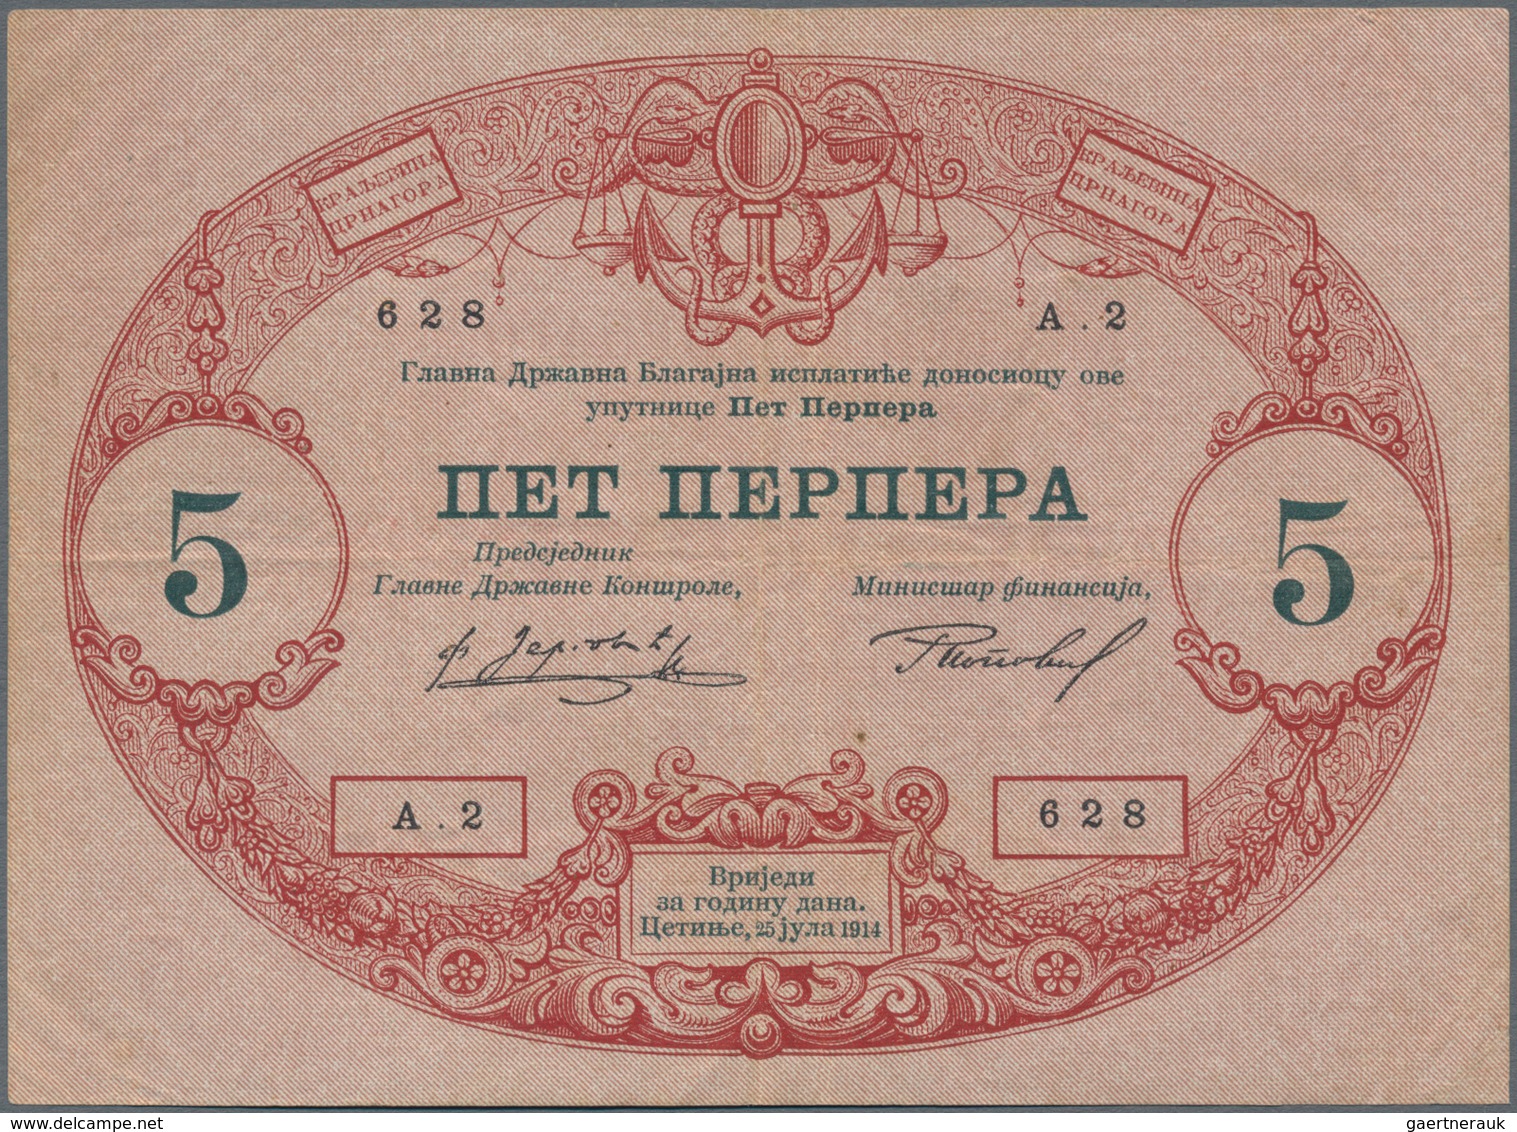 Montenegro: Complete set of the 25.07.1914 "Large Arms on Back" issue with 1, 2, 5, 10, 20, 50 and 1